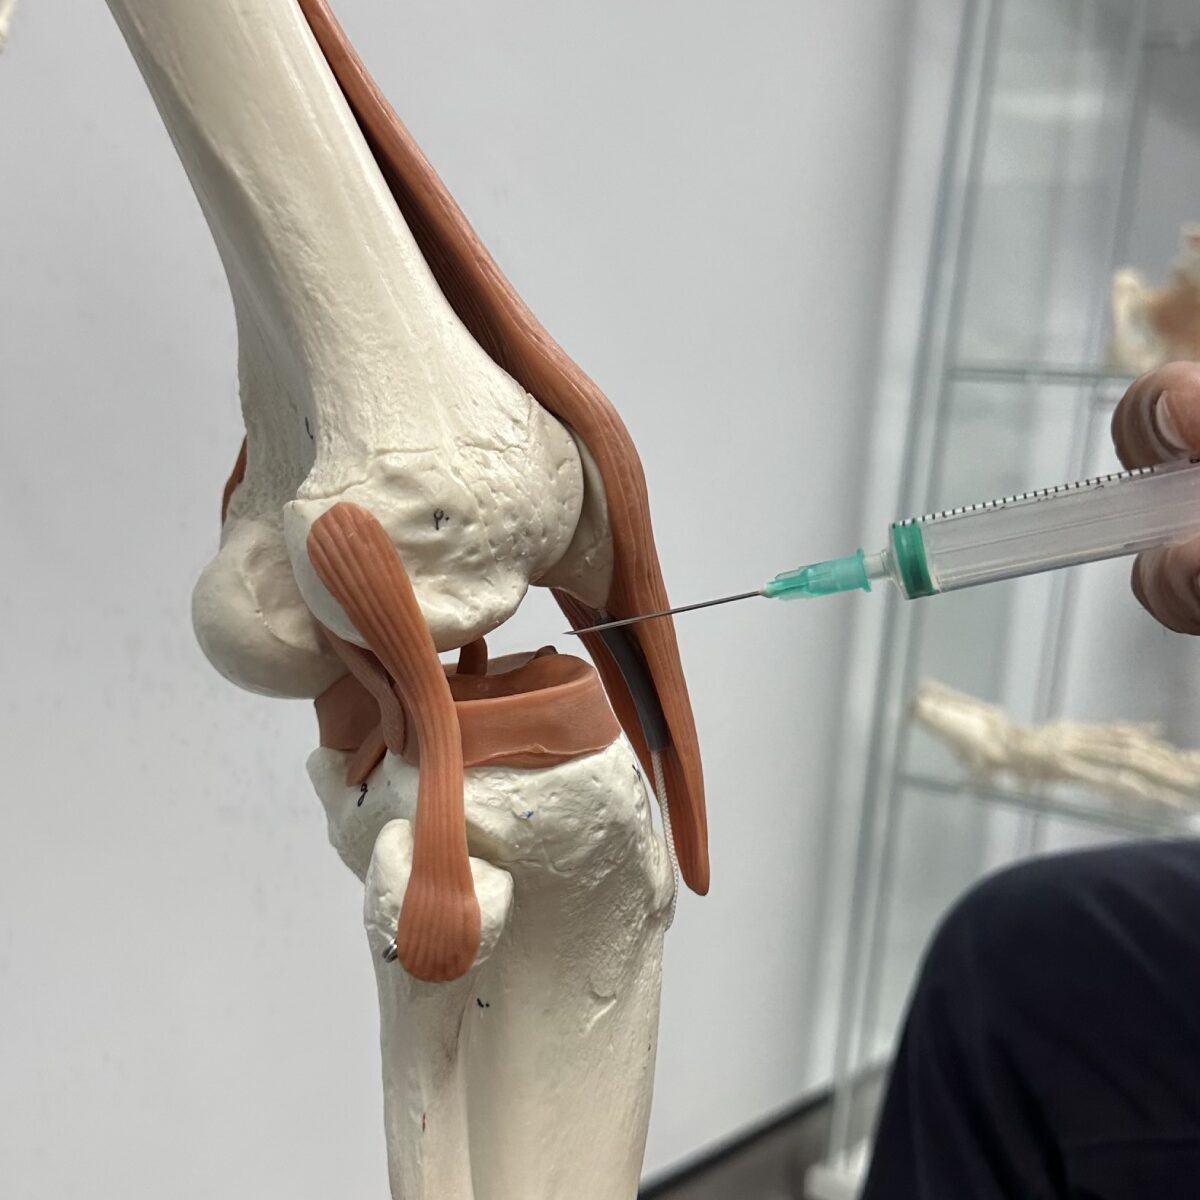 Image showing Ostenil injected into model of a Knee